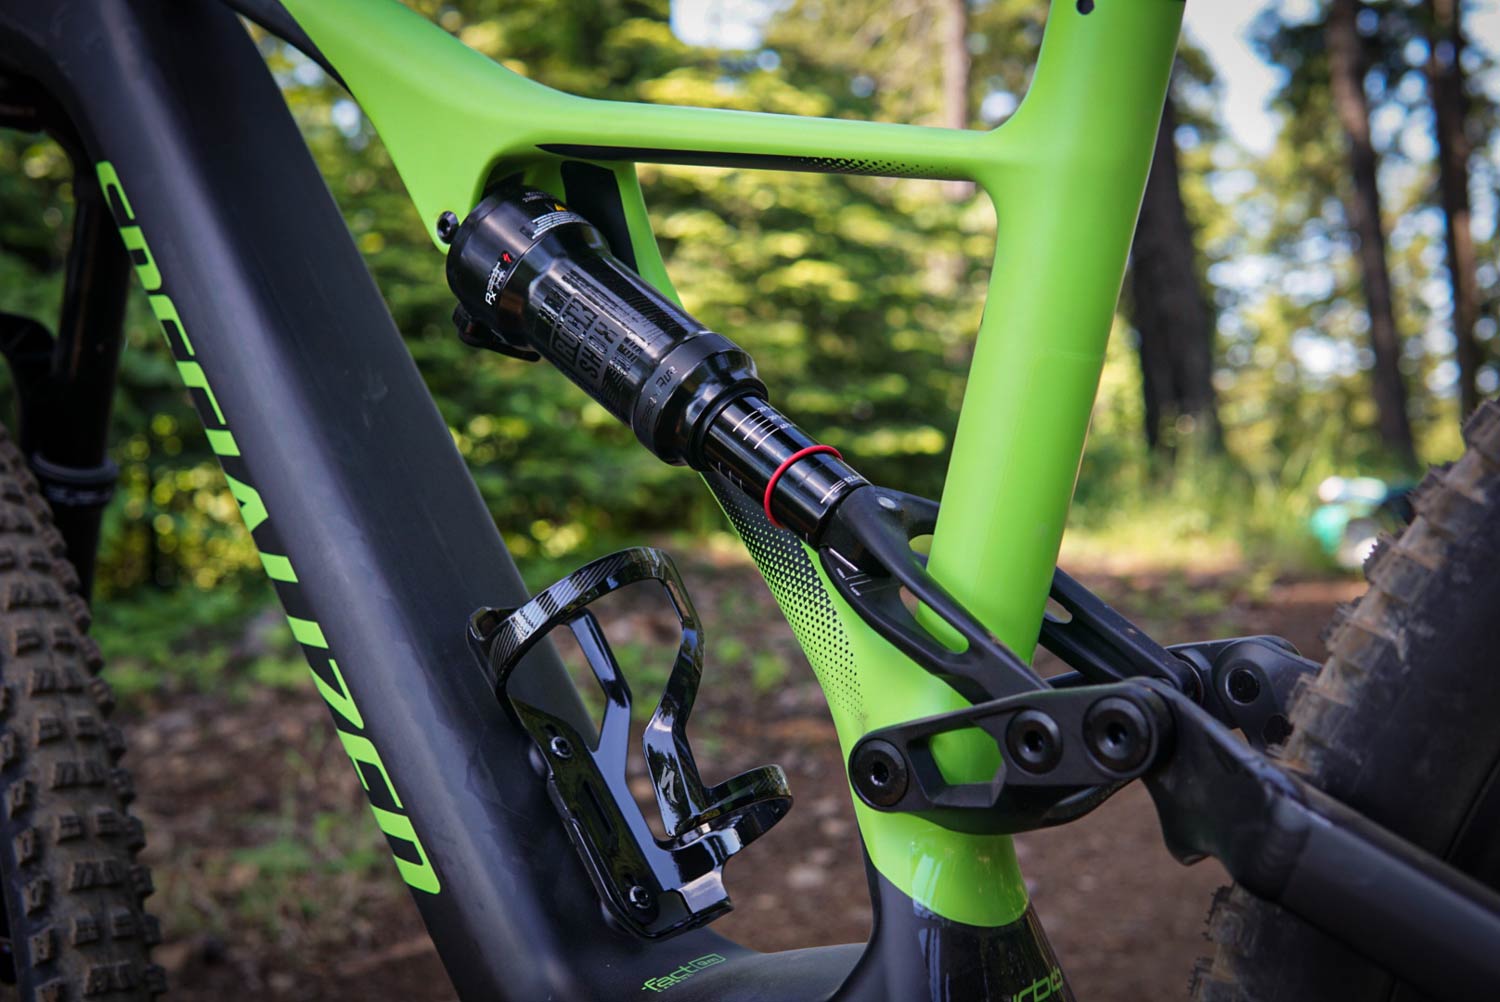 Specialized Turbo Levo Expert shock and suspension